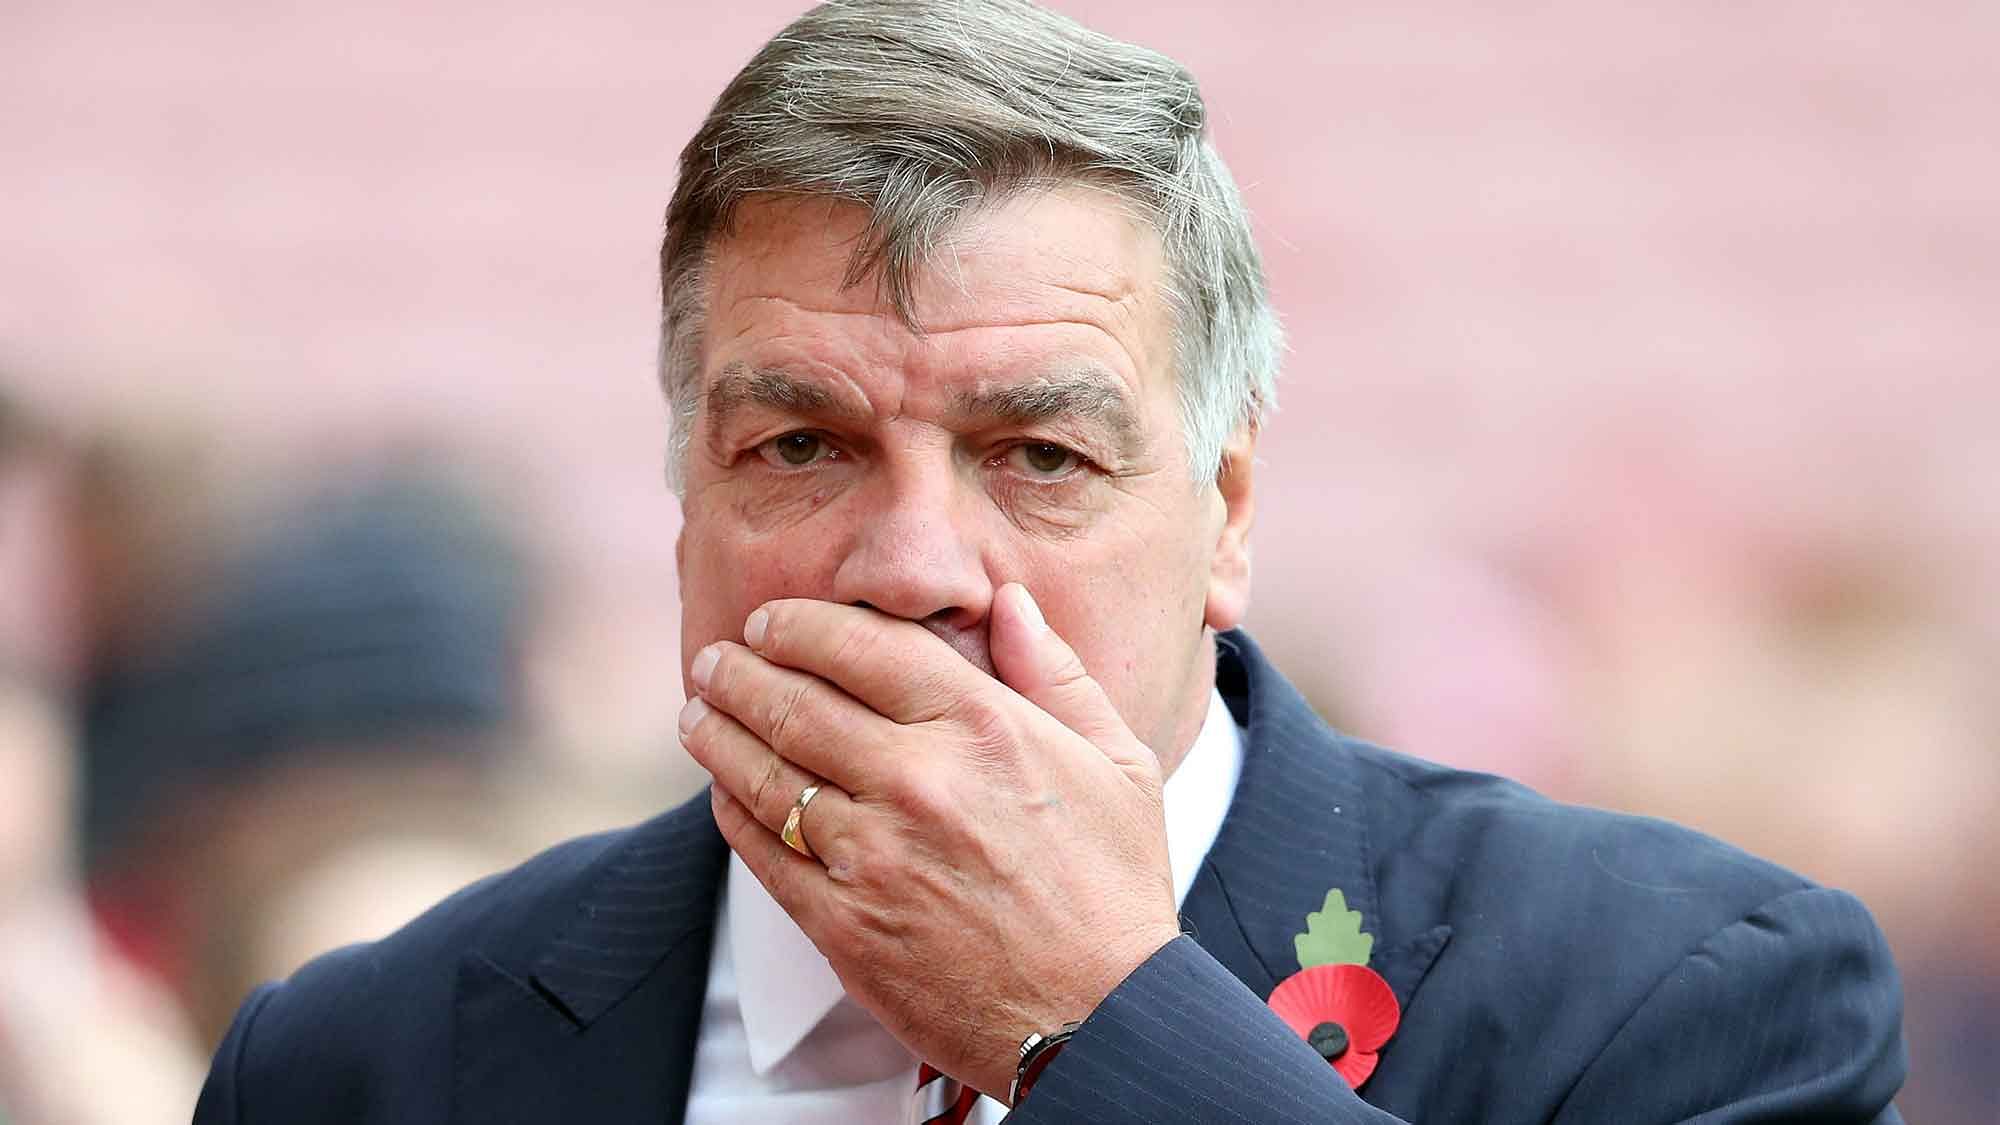 File picture of the now former England manager Sam Allardyce. (Photo: AP)